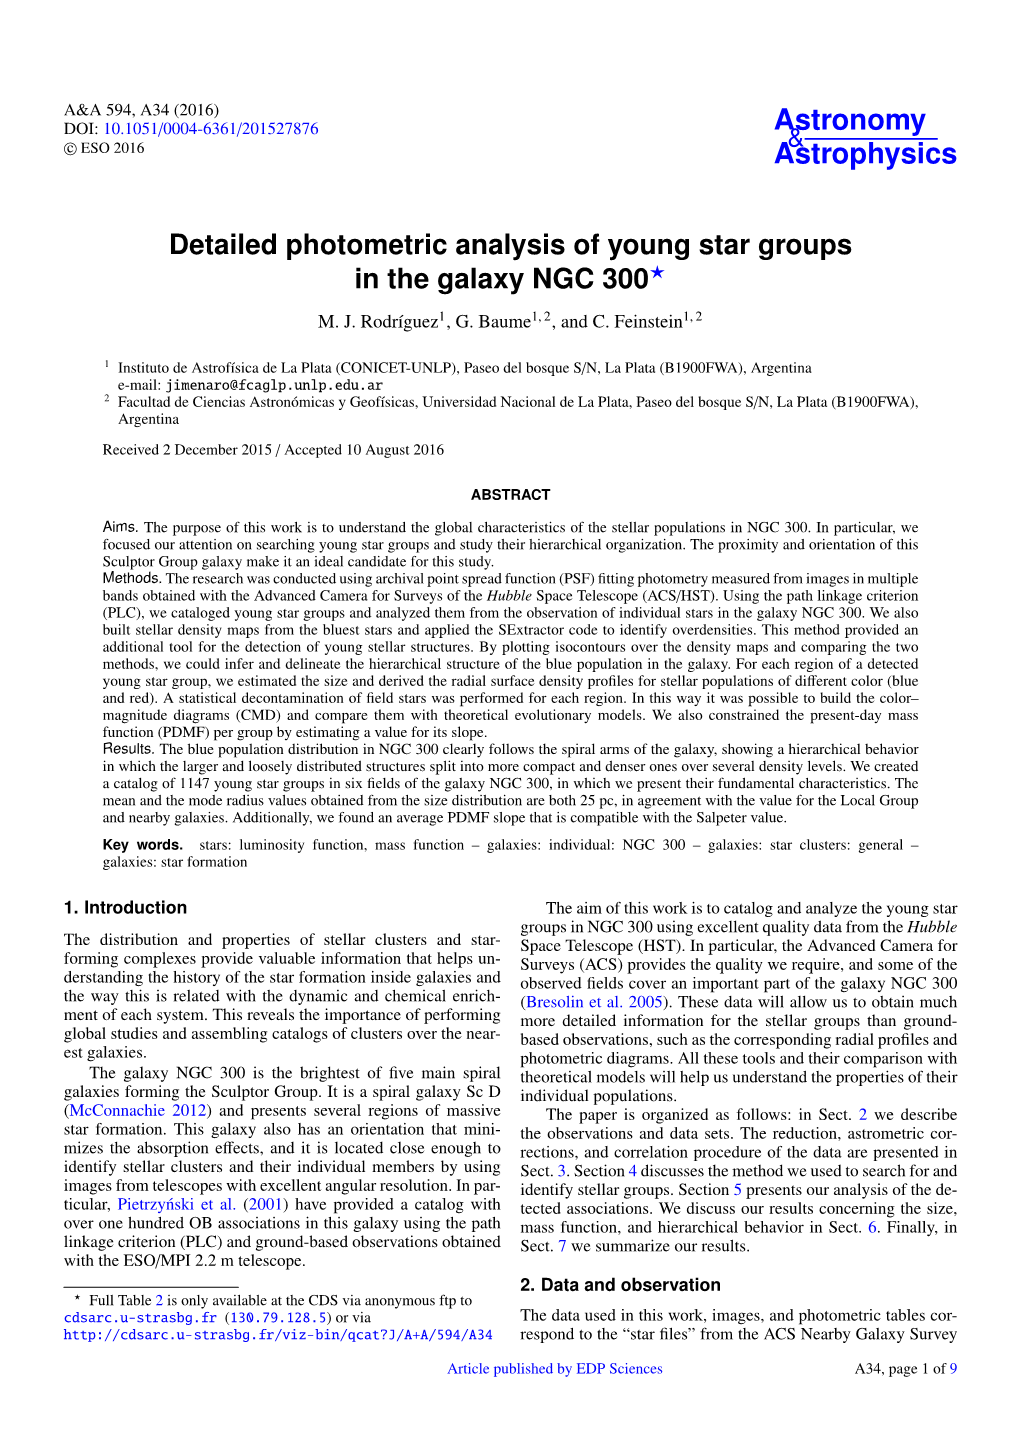 Detailed Photometric Analysis of Young Star Groups in the Galaxy NGC 300? M